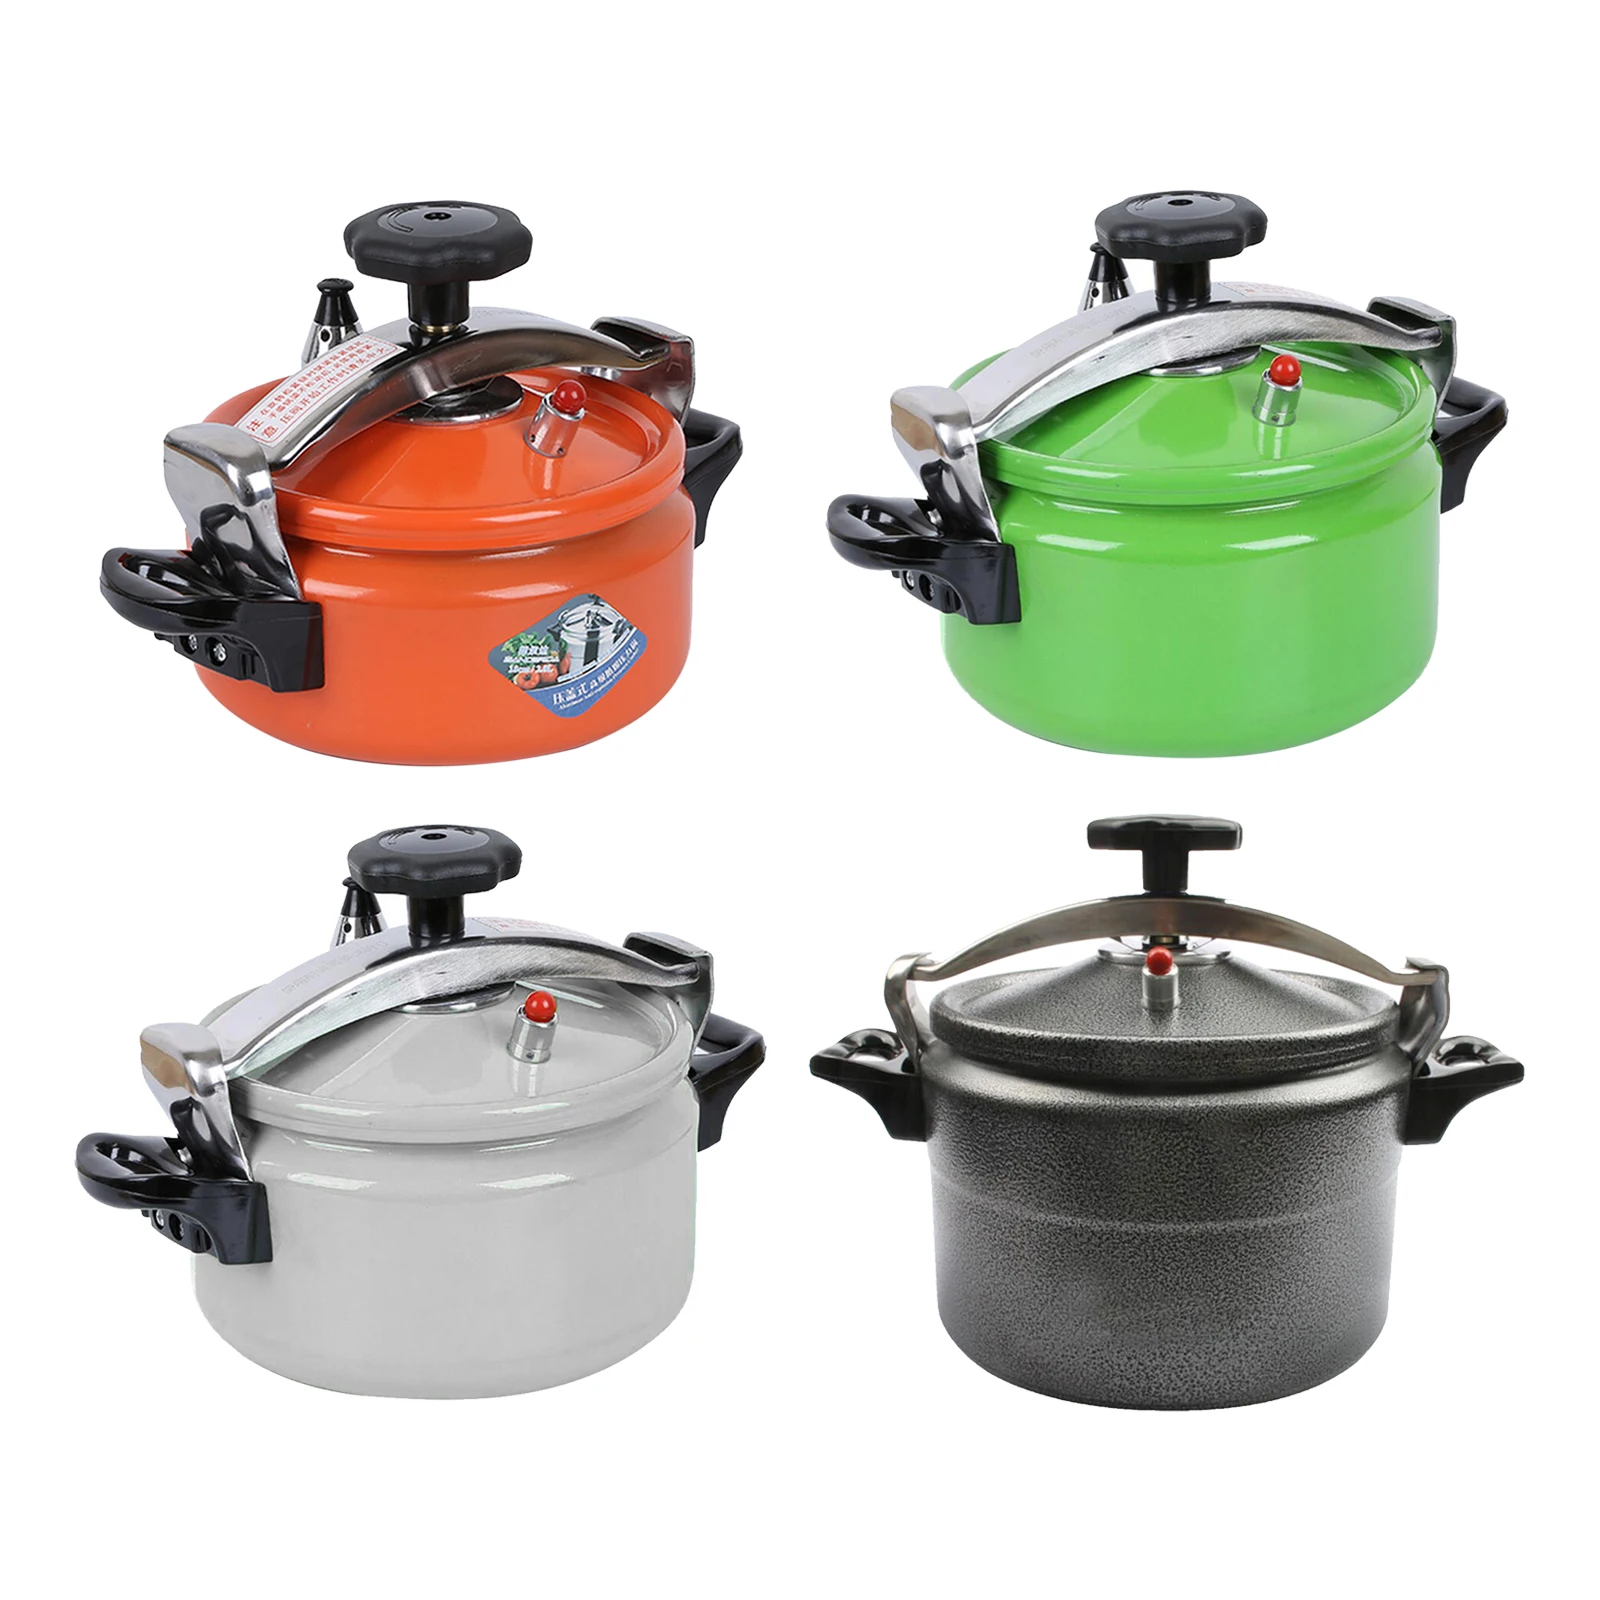 

Cooker For Electric Soup Ceramic Stove Pot Backpacking Cooking Camping Rice Pressure Multi-functional Cooker Outdoor Slow